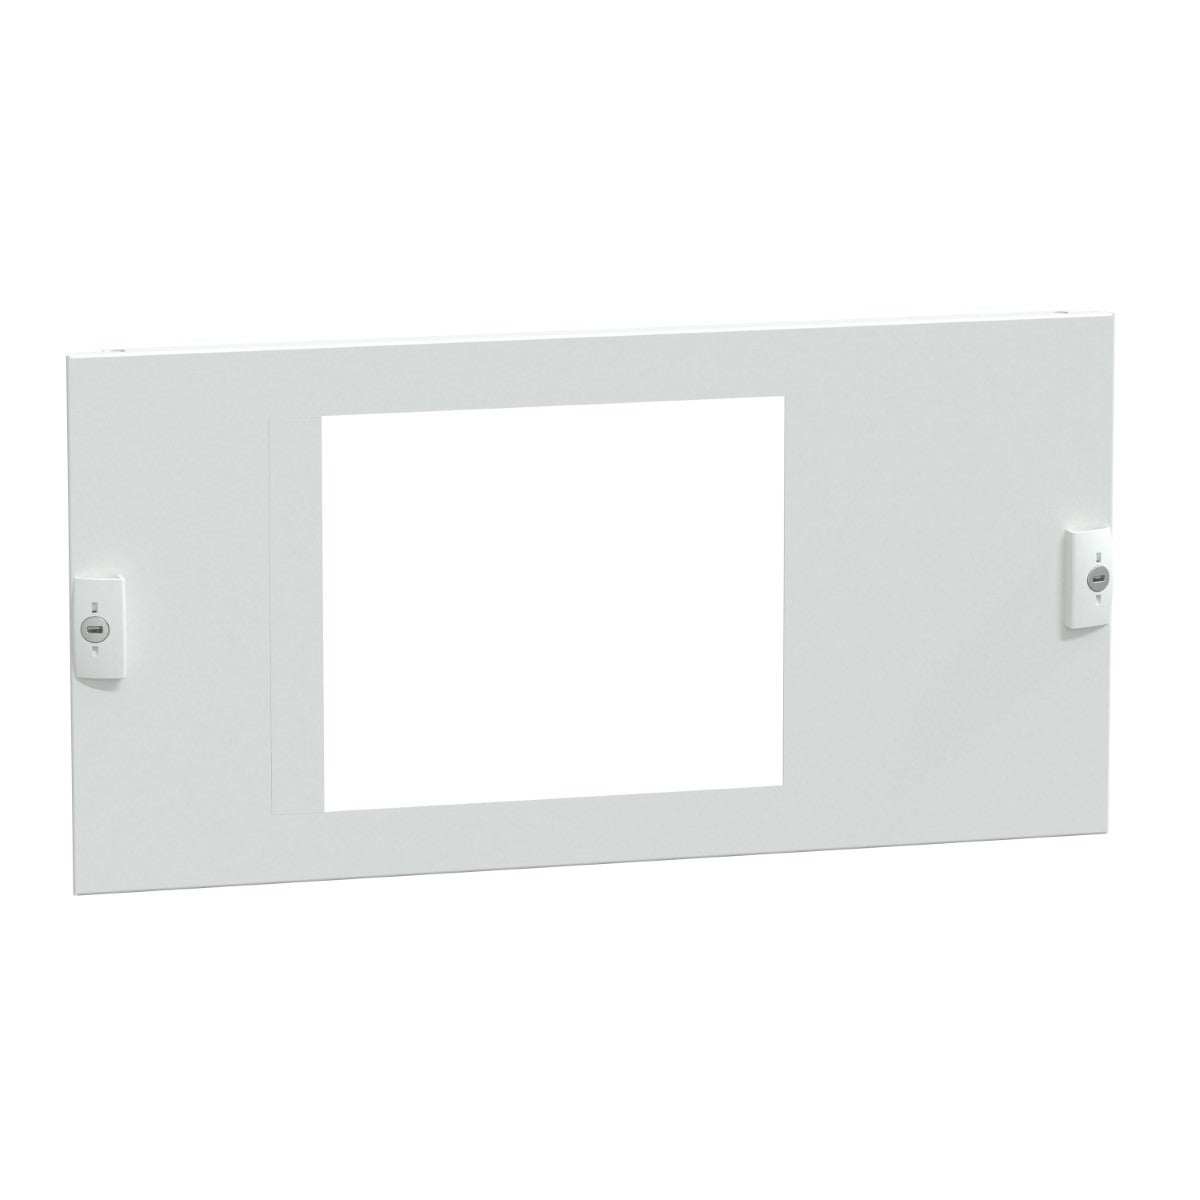 FRONT PLATE ISFT250 HORIZONTAL W600 5M